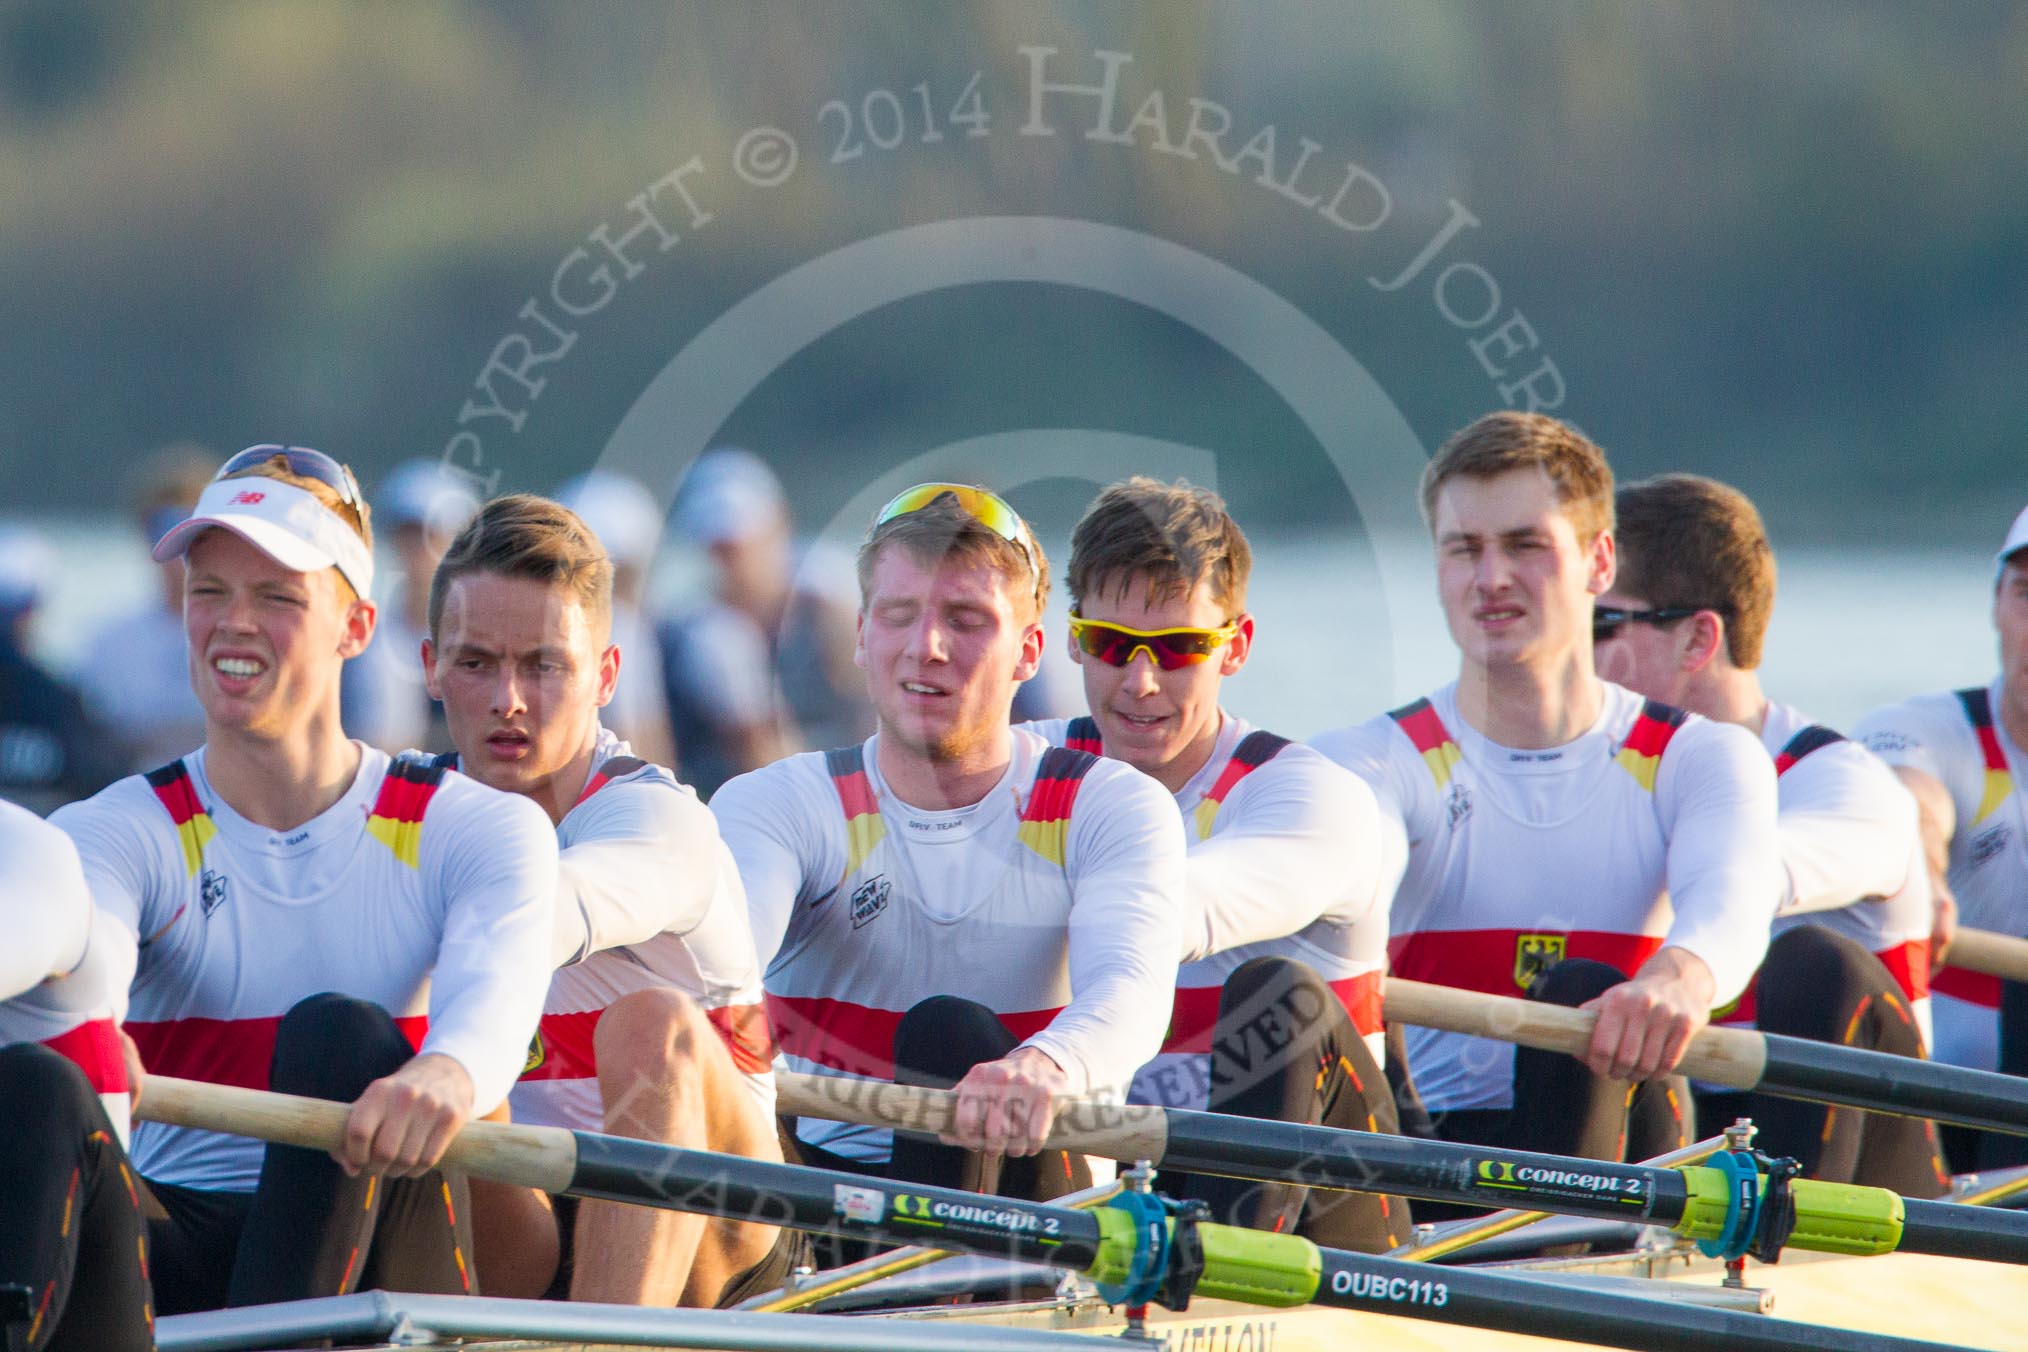 The Boat Race season 2014 - fixture OUBC vs German U23: The German U23-boat: 7 Ole Schwiethal, 6 Arne Schwiethal, 5 Johannes Weissenfeld, 4 Maximilian Korge, 3 Malte Daberkow, 2 Finn Knuppel. In the background the leading OUBC boat..
River Thames between Putney Bridge and Chiswick Bridge,



on 08 March 2014 at 17:02, image #196